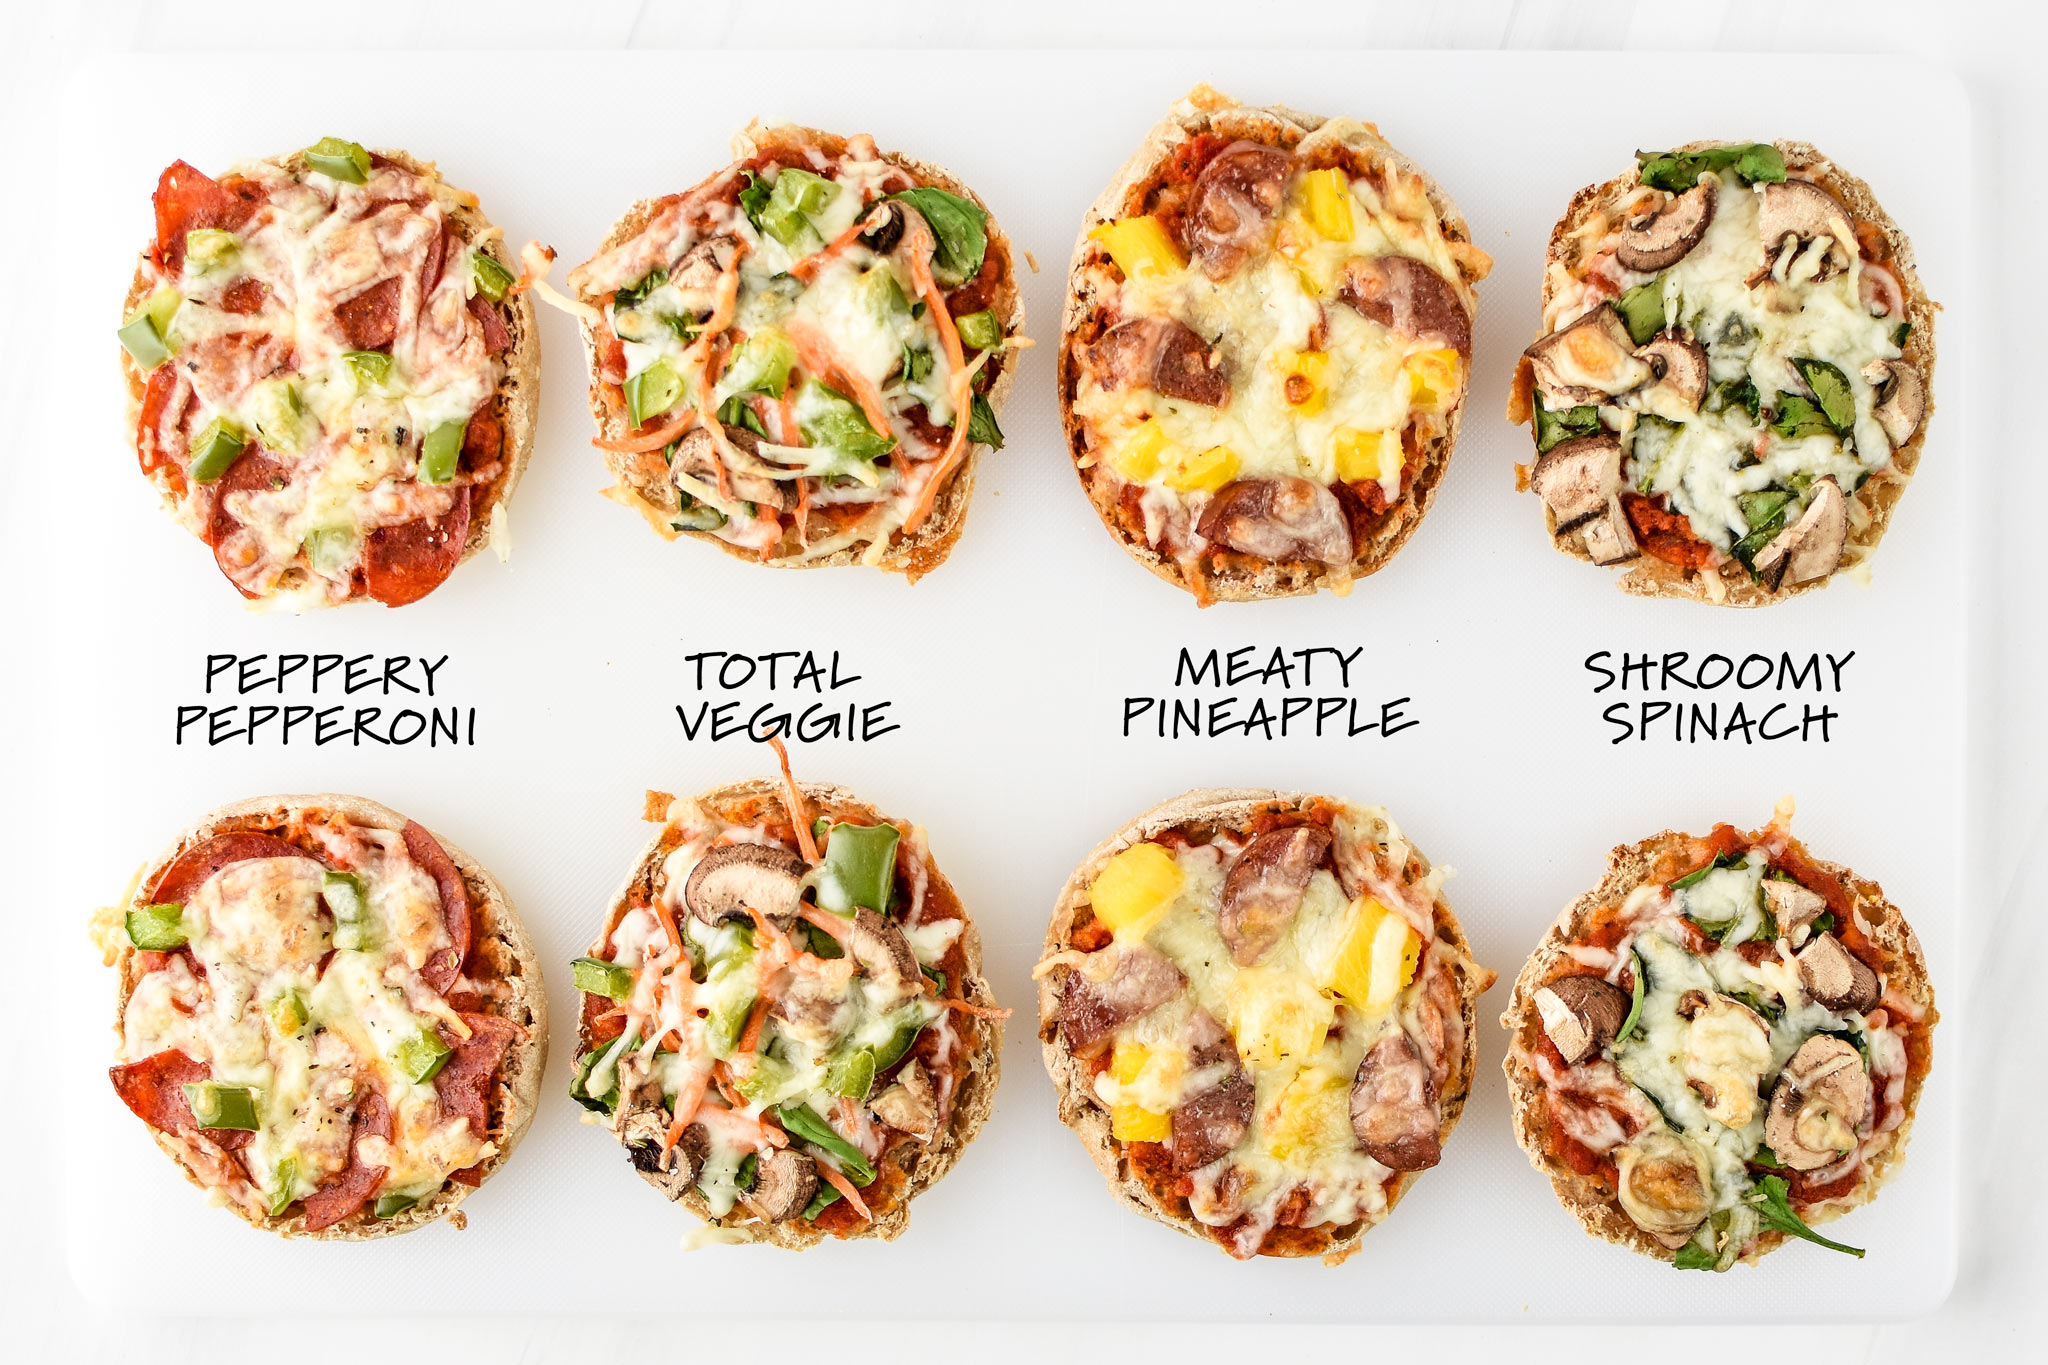 Four kinds of english muffin mini pizzas to try for lunch meal prep!